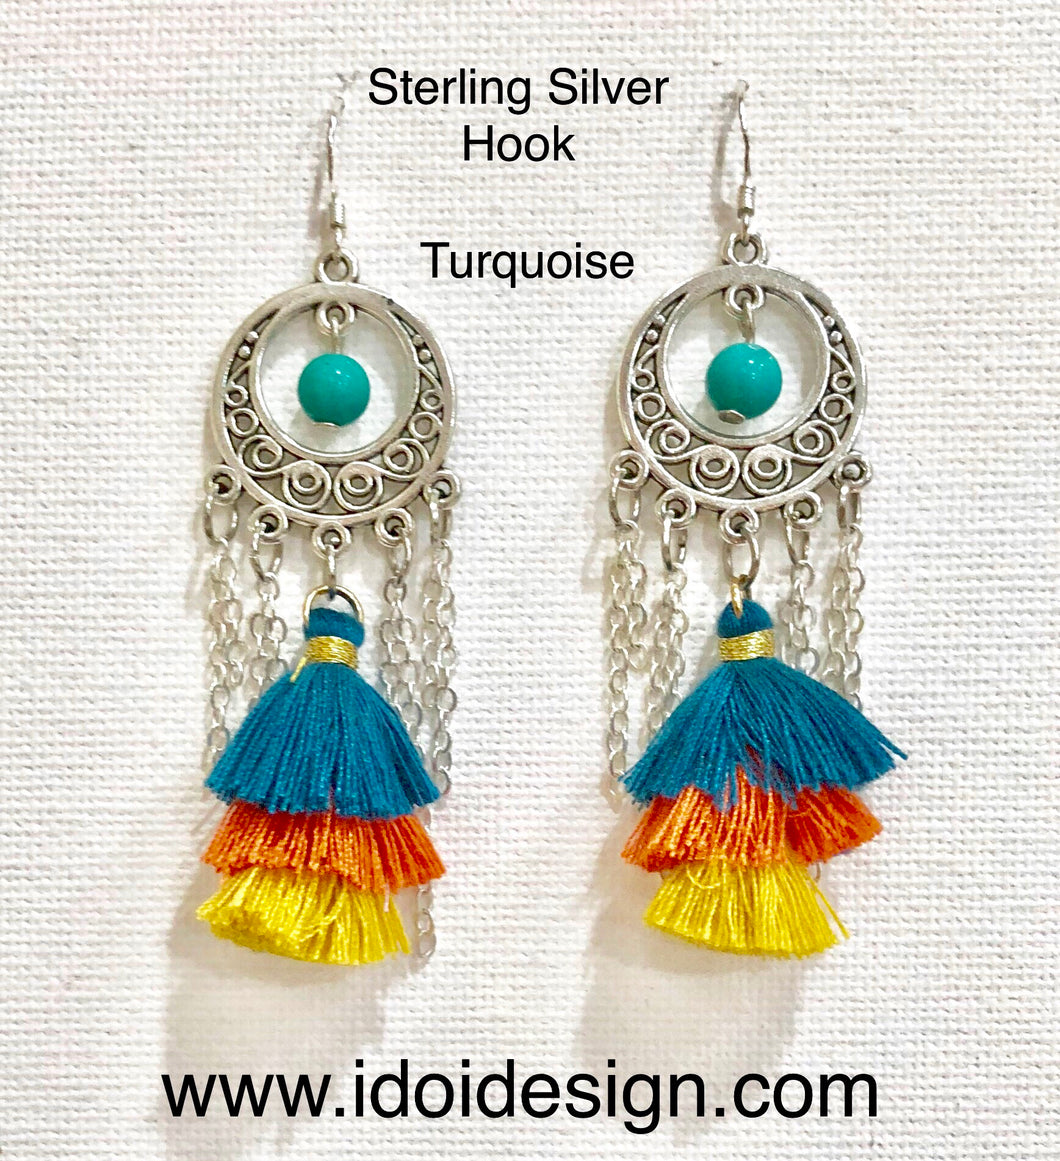 ET-025 Turquoise and Crystal Earrings